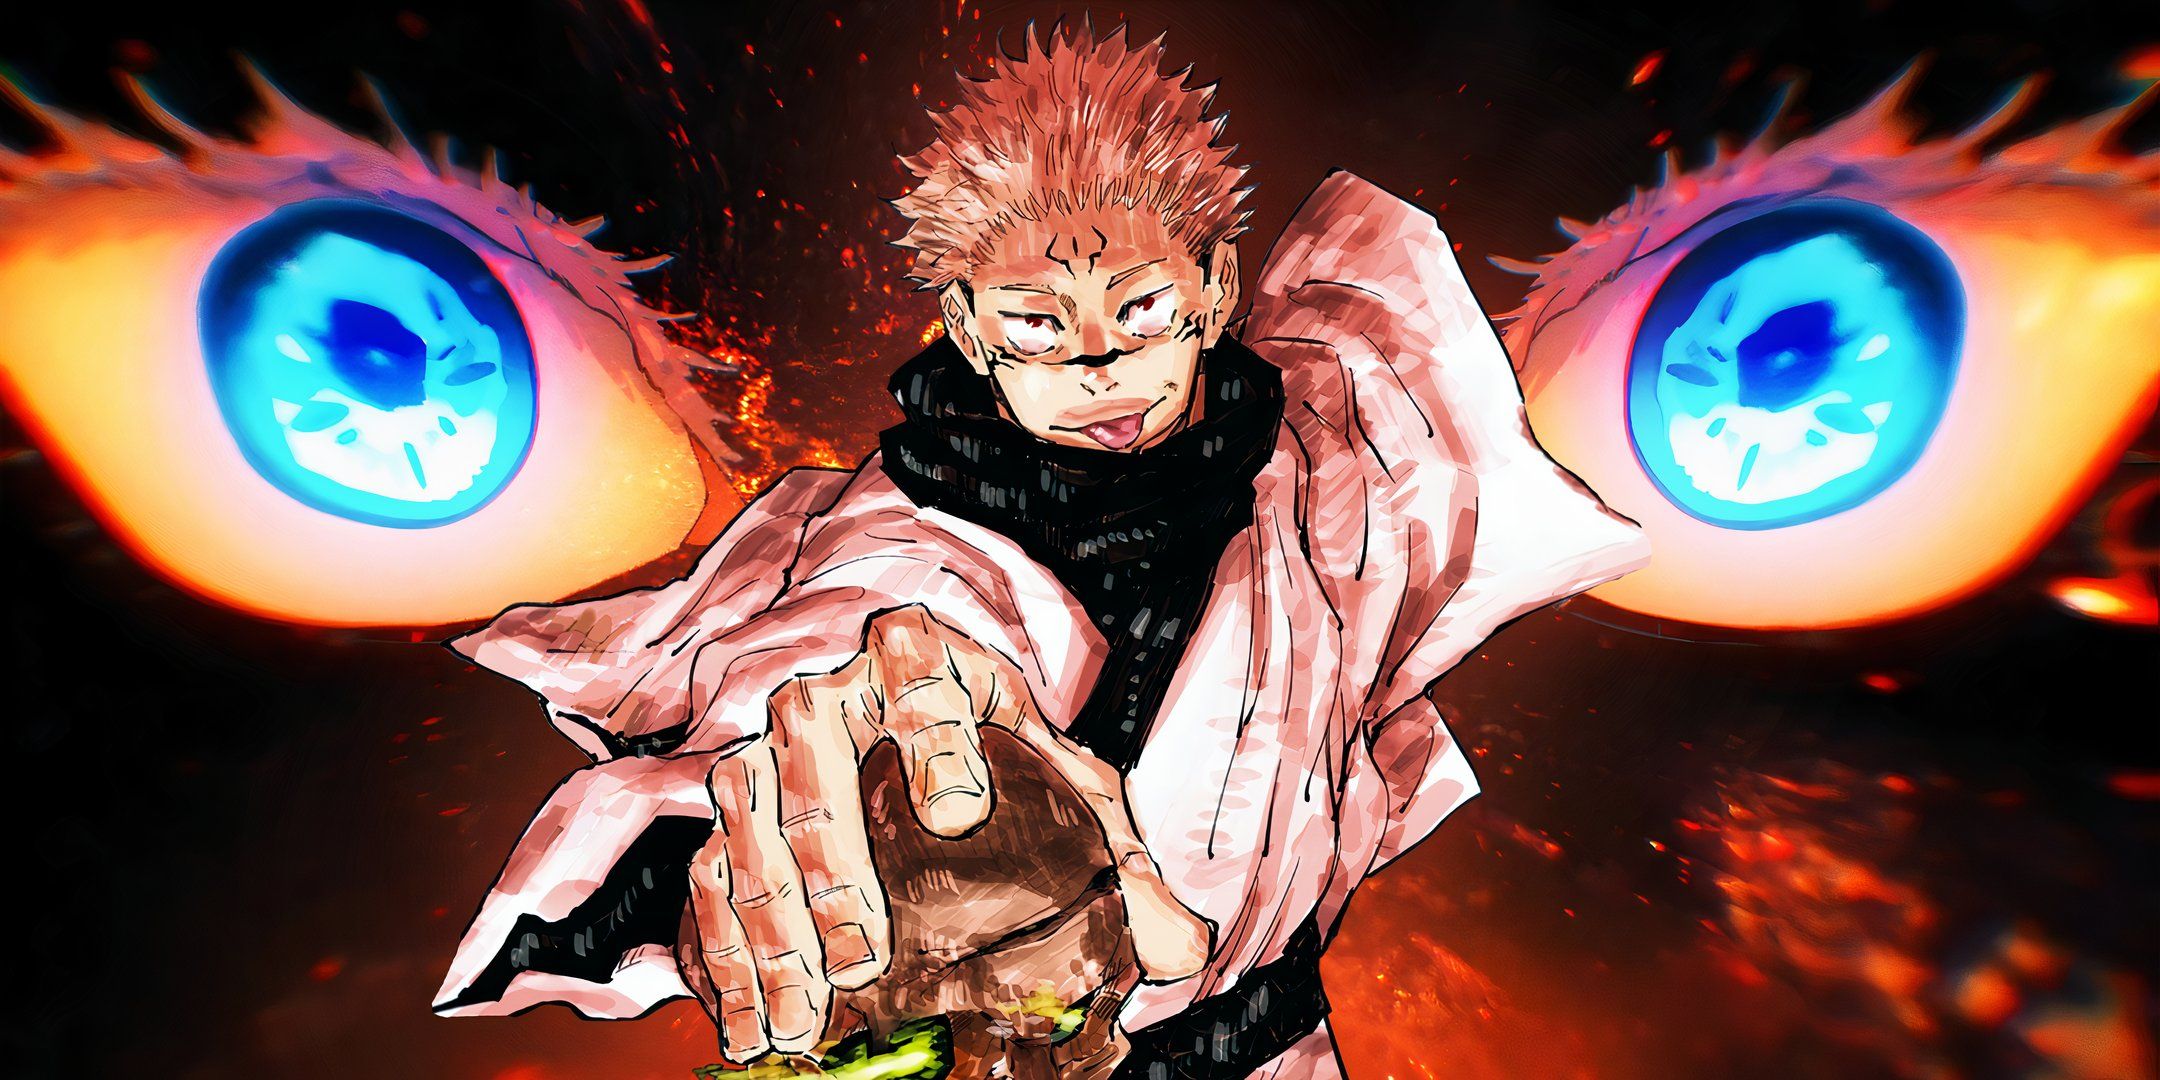 Sukuna from jujutsu kaisen with his hand on a skull smiling and sticking his tongue out with gojo's eyes in the background